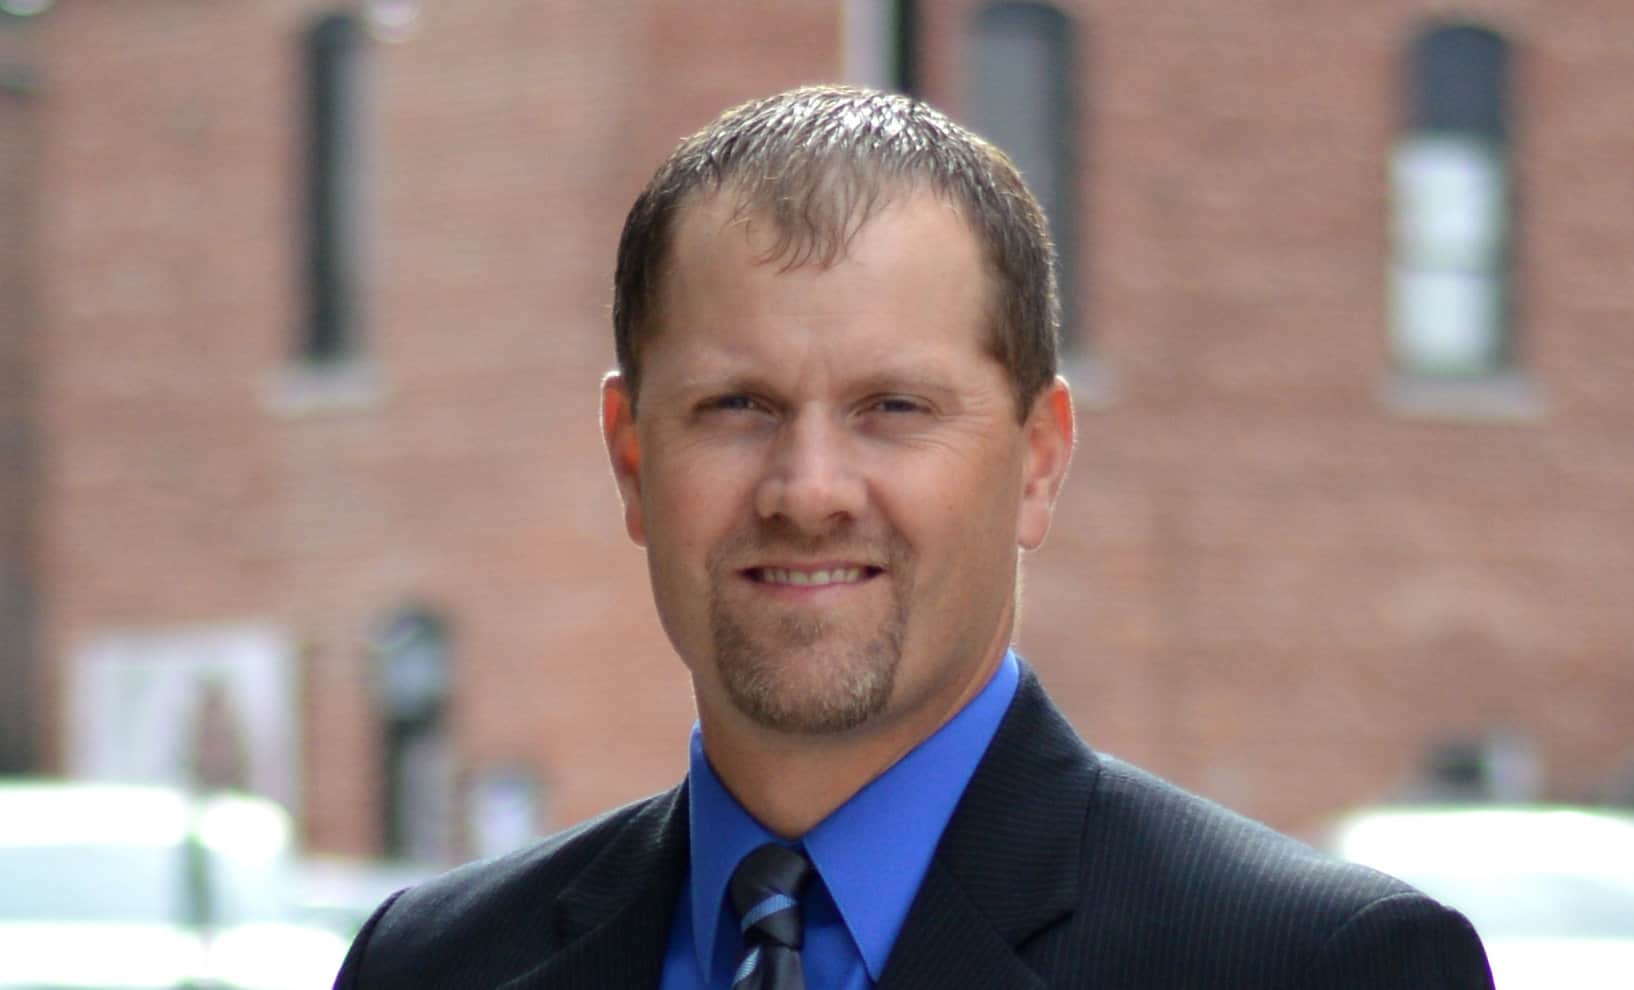 photo of Jeff Thomasson, Senior Controller of The A Team Consulting